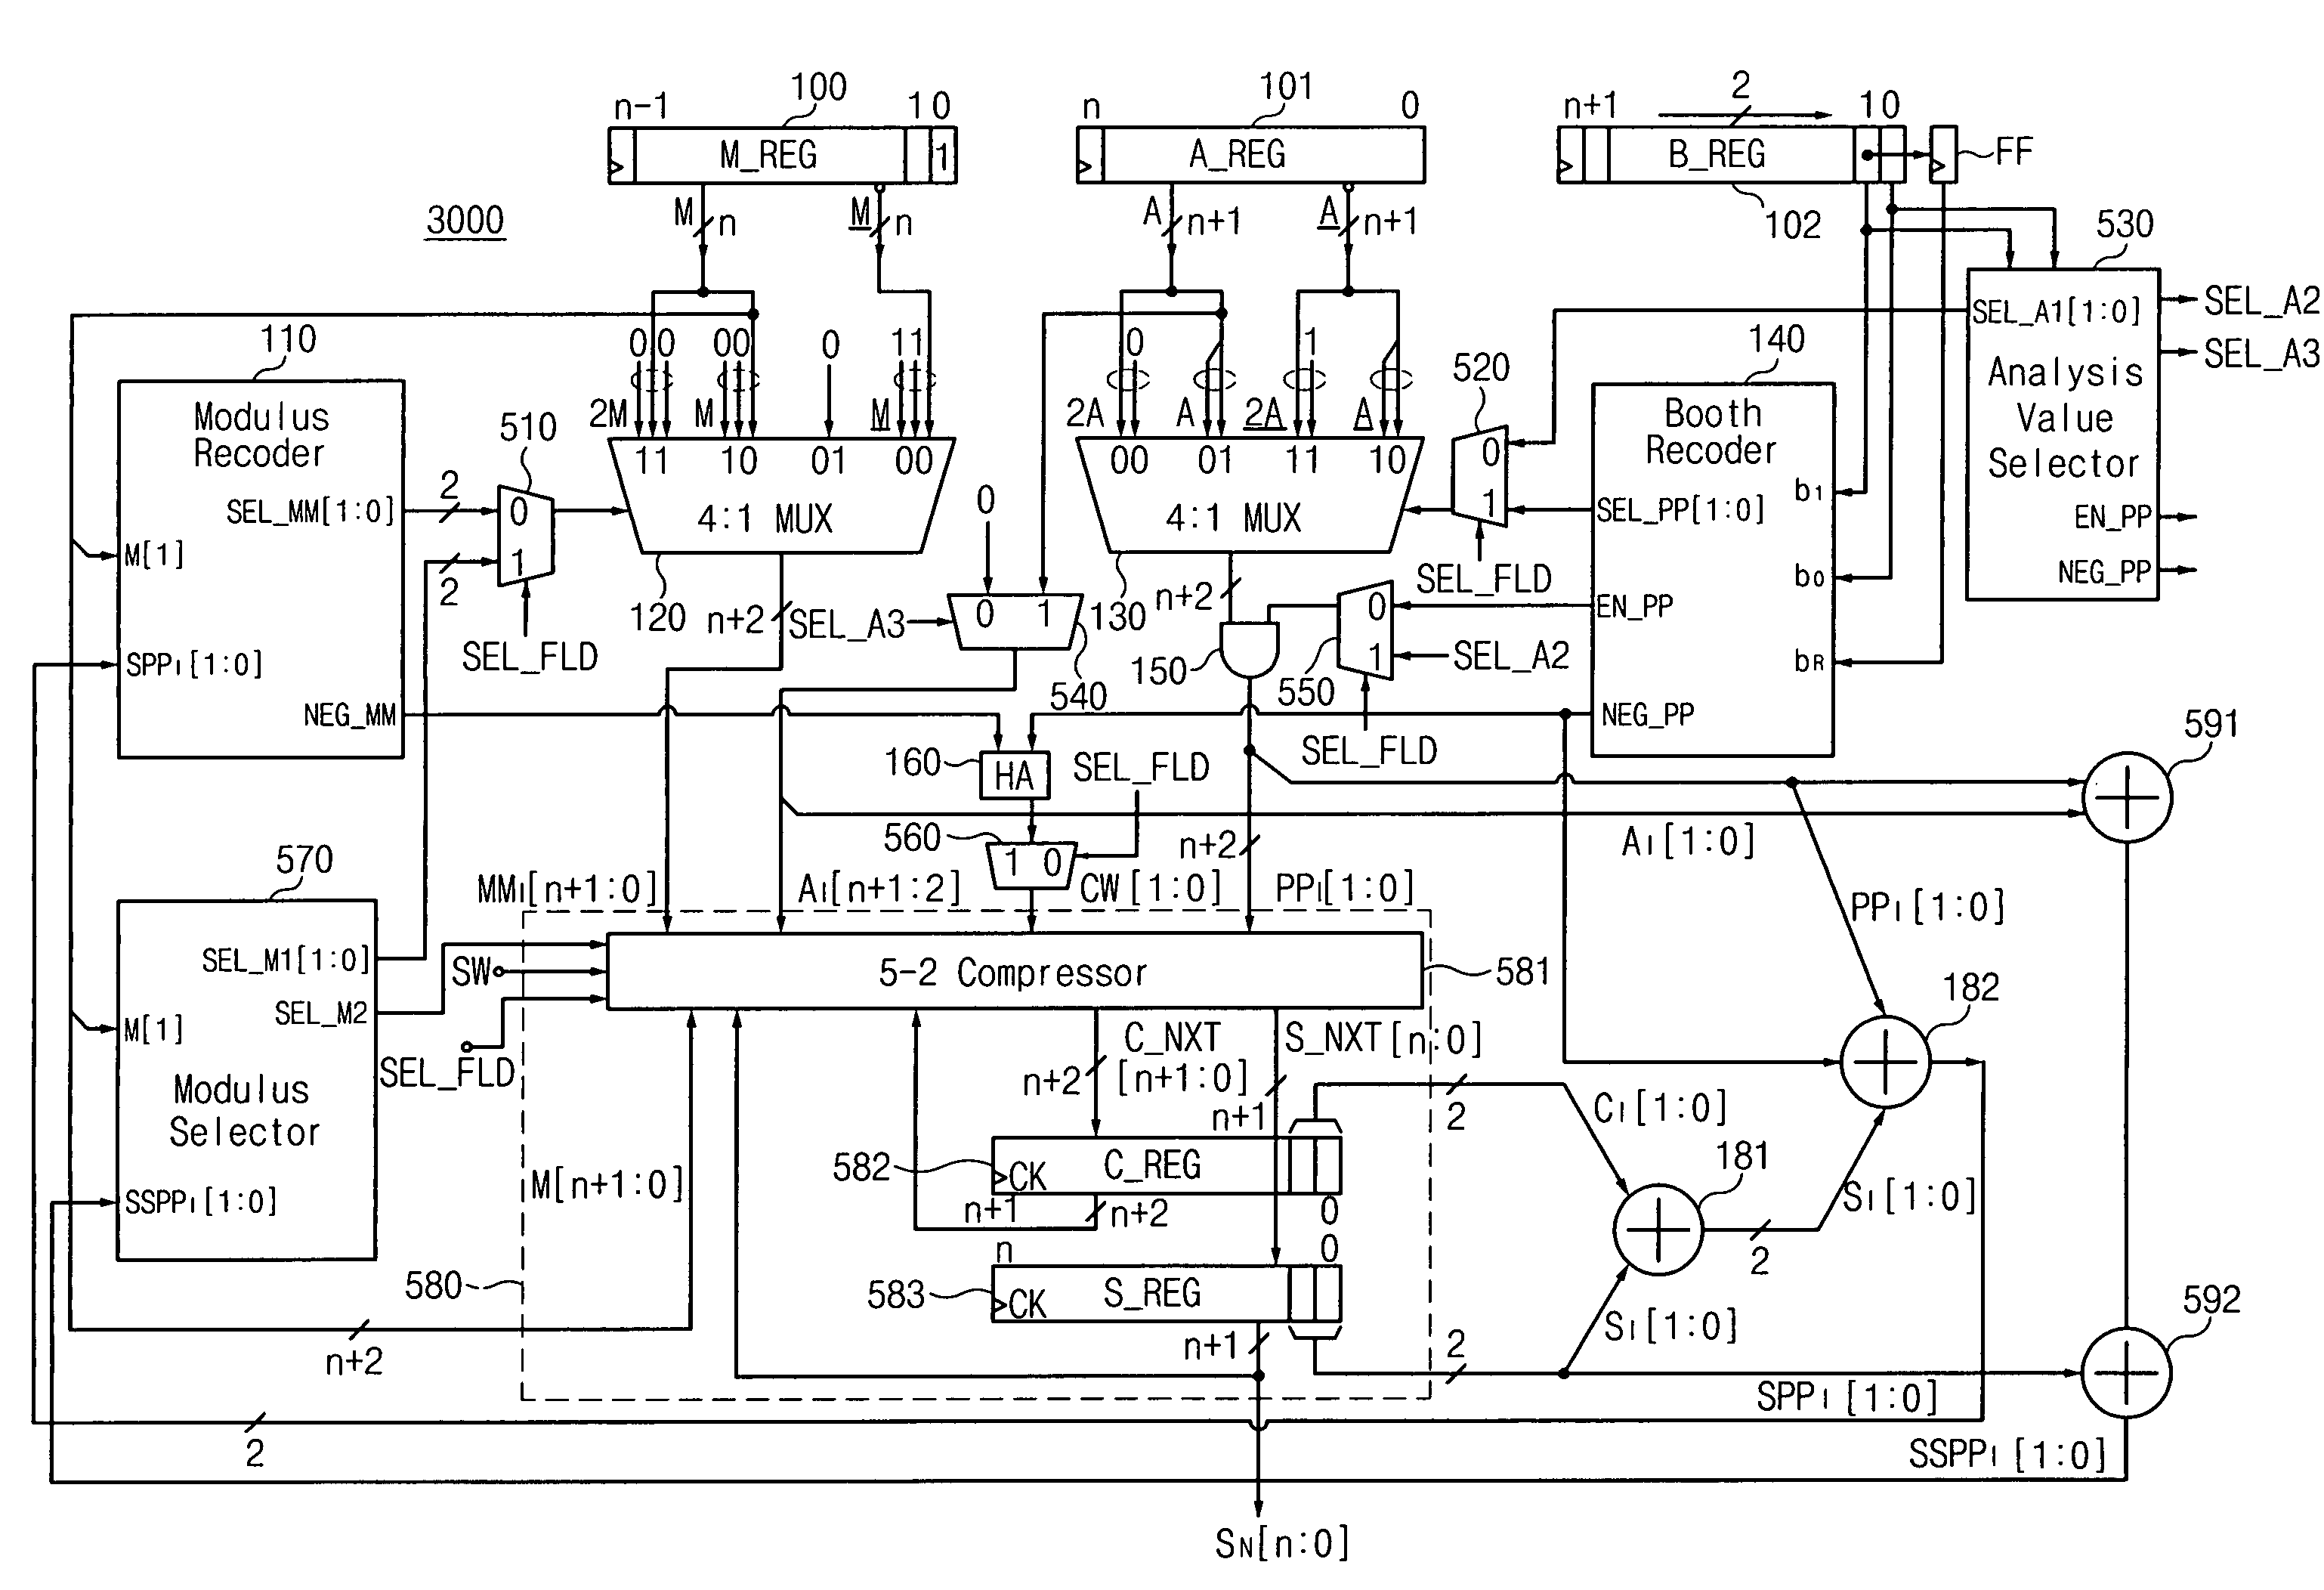 Montgomery modular multiplier and method thereof using carry save addition